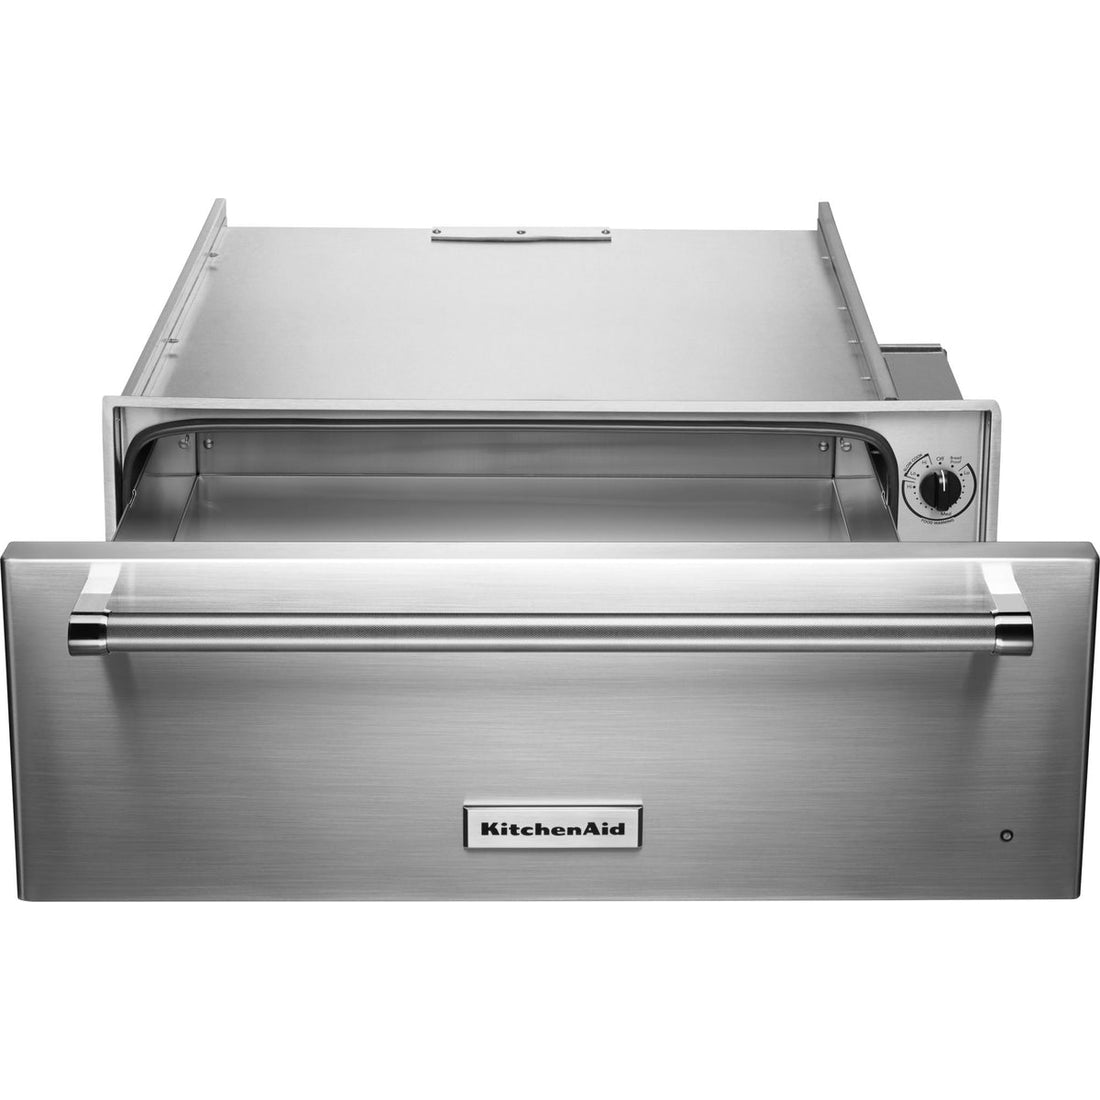 Why Buy a Warming Drawer?